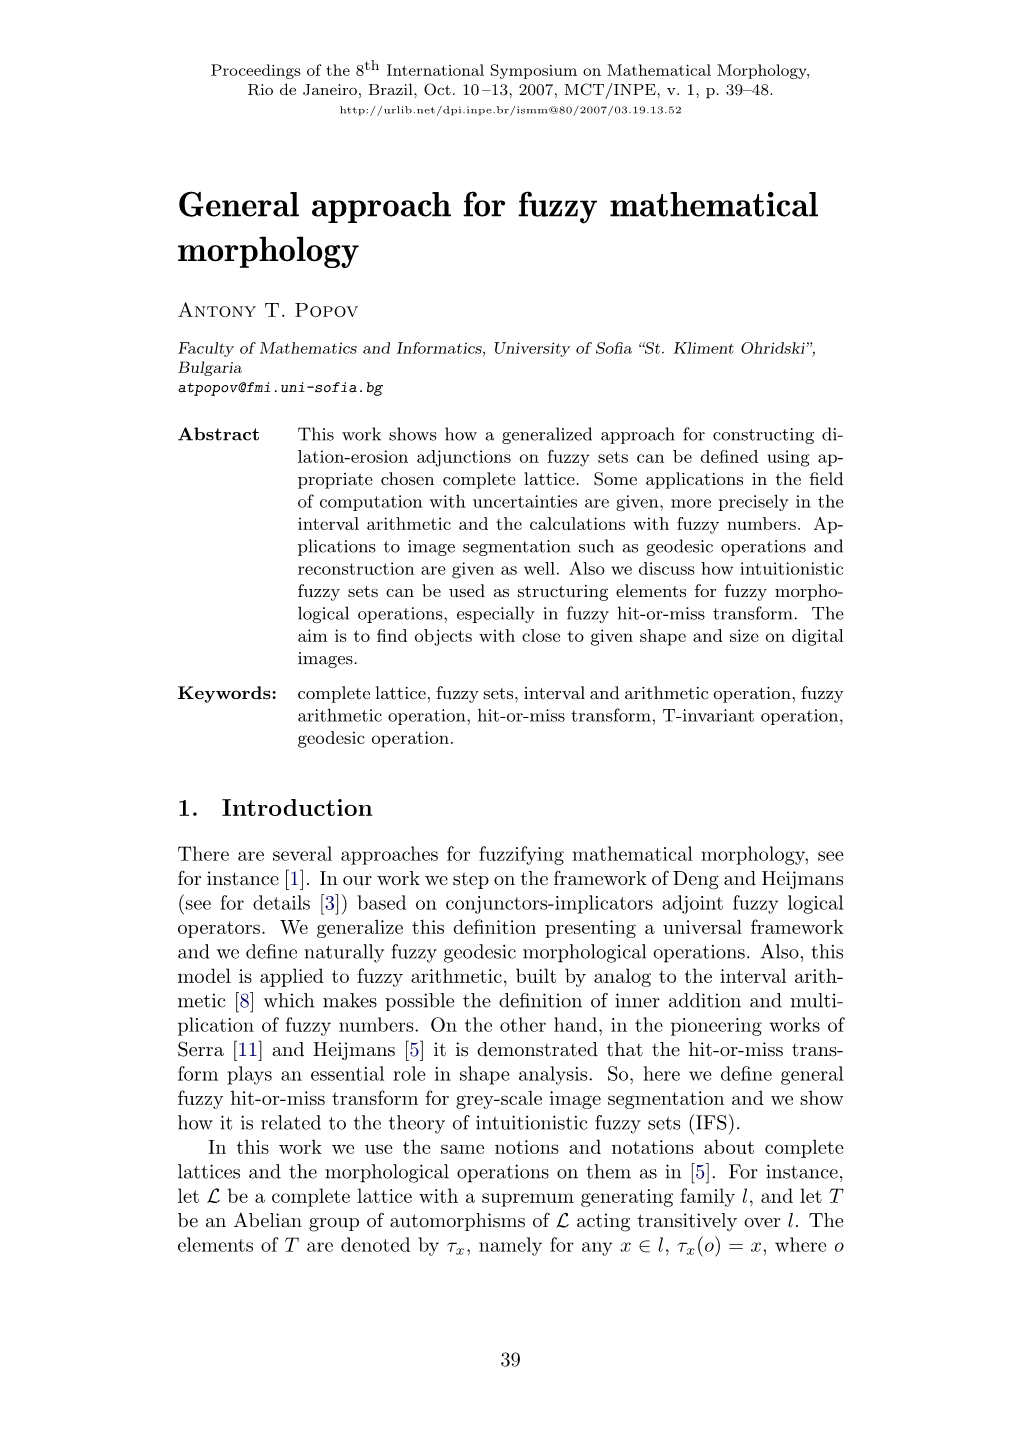 General Approach for Fuzzy Mathematical Morphology